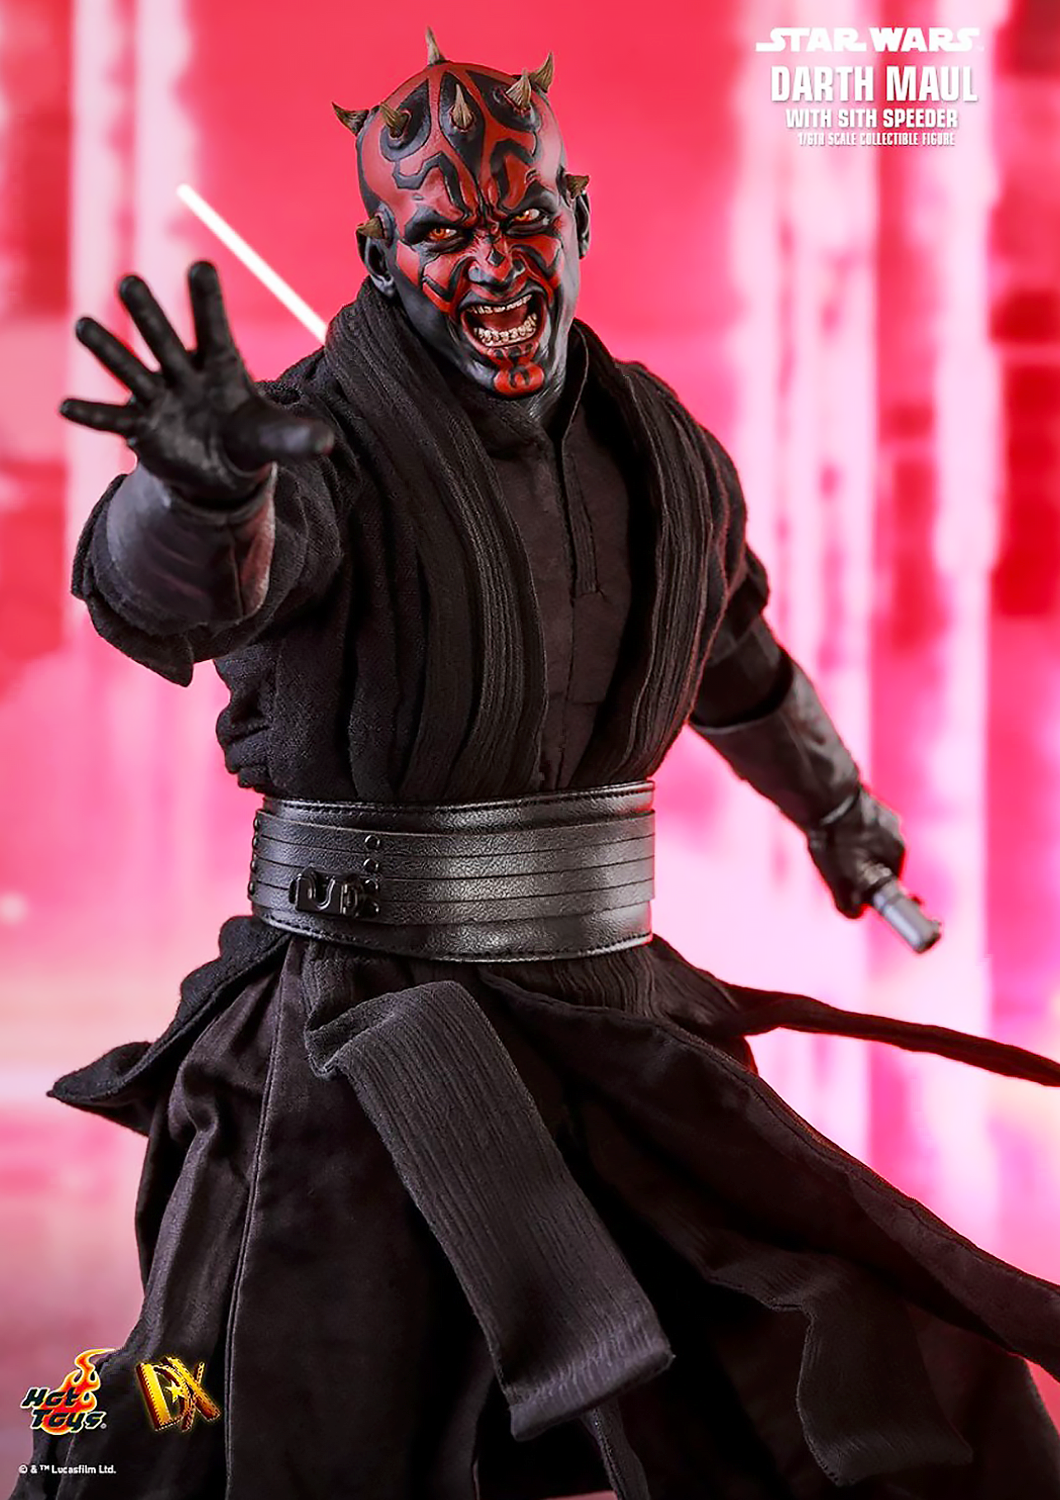 HOT TOYS STAR WARS EPISODE I: THE PHANTOM MENACE DARTH MAUL WITH SITH SPEEDER SE (SPECIAL EDITION) DX17 - Anotoys Collectibles